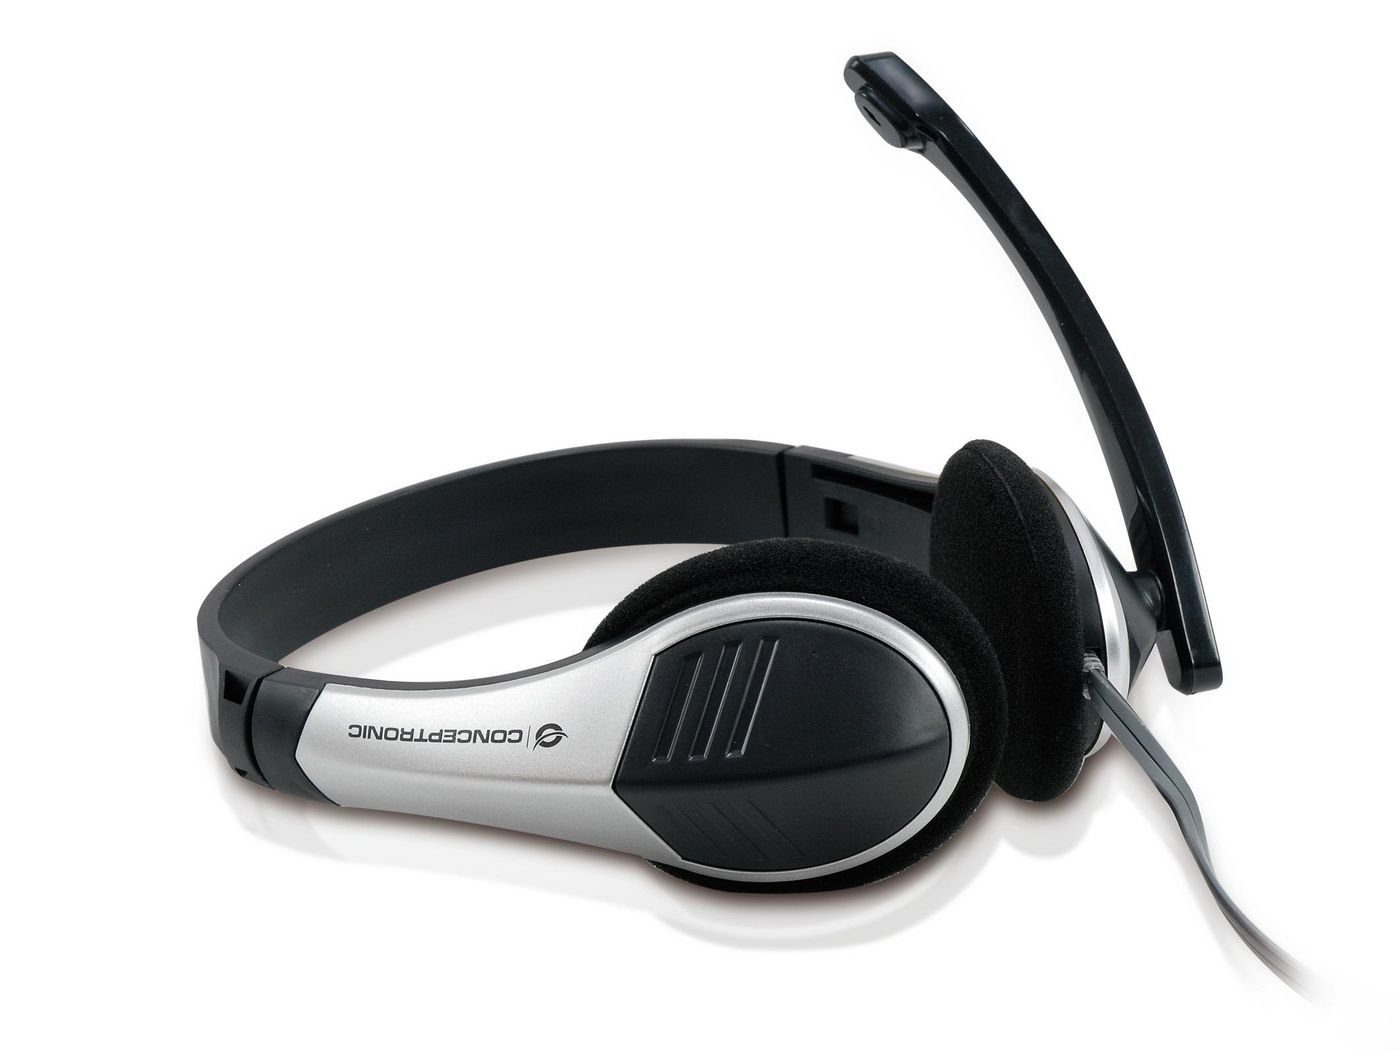 Conceptronic Headset Conceptronic Headset, Kopfbügel Stereo,